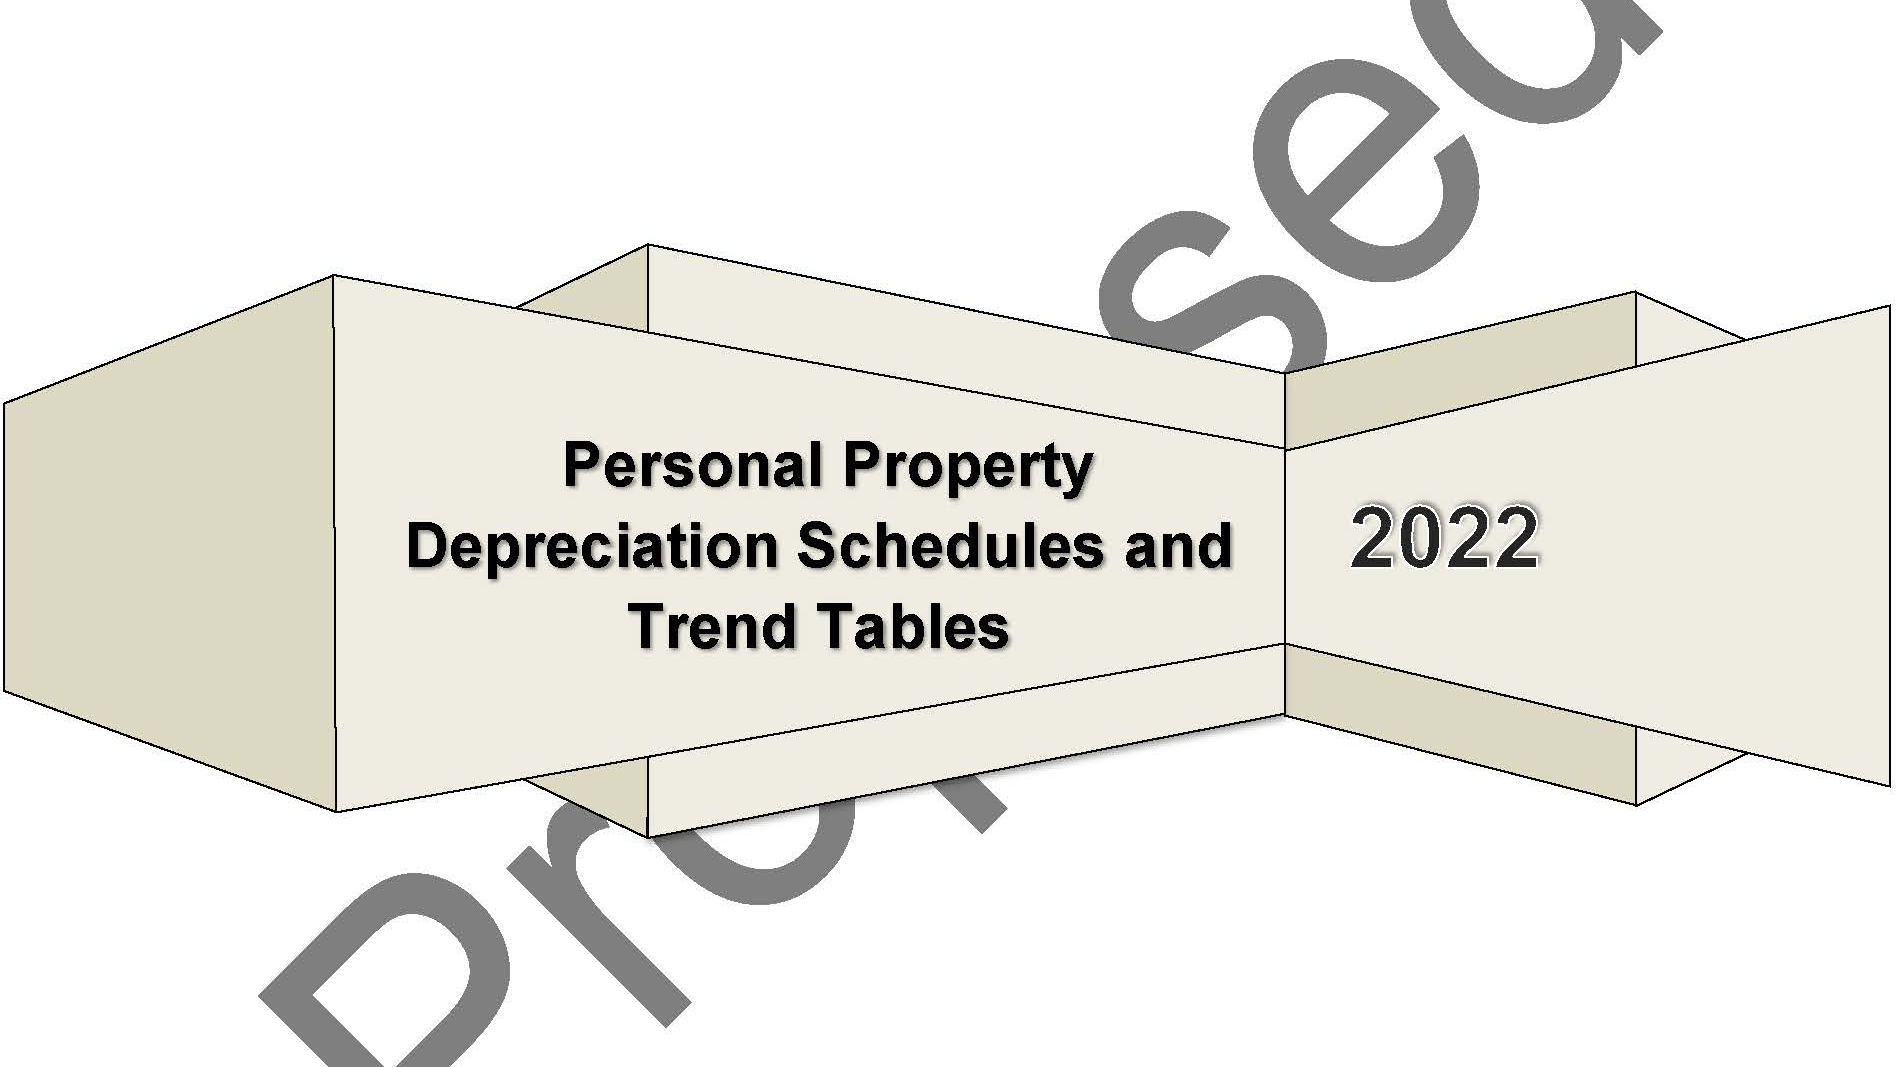 Updated: 2022 Personal Property Reporting Depreciation Schedules and Trend Table Adopted